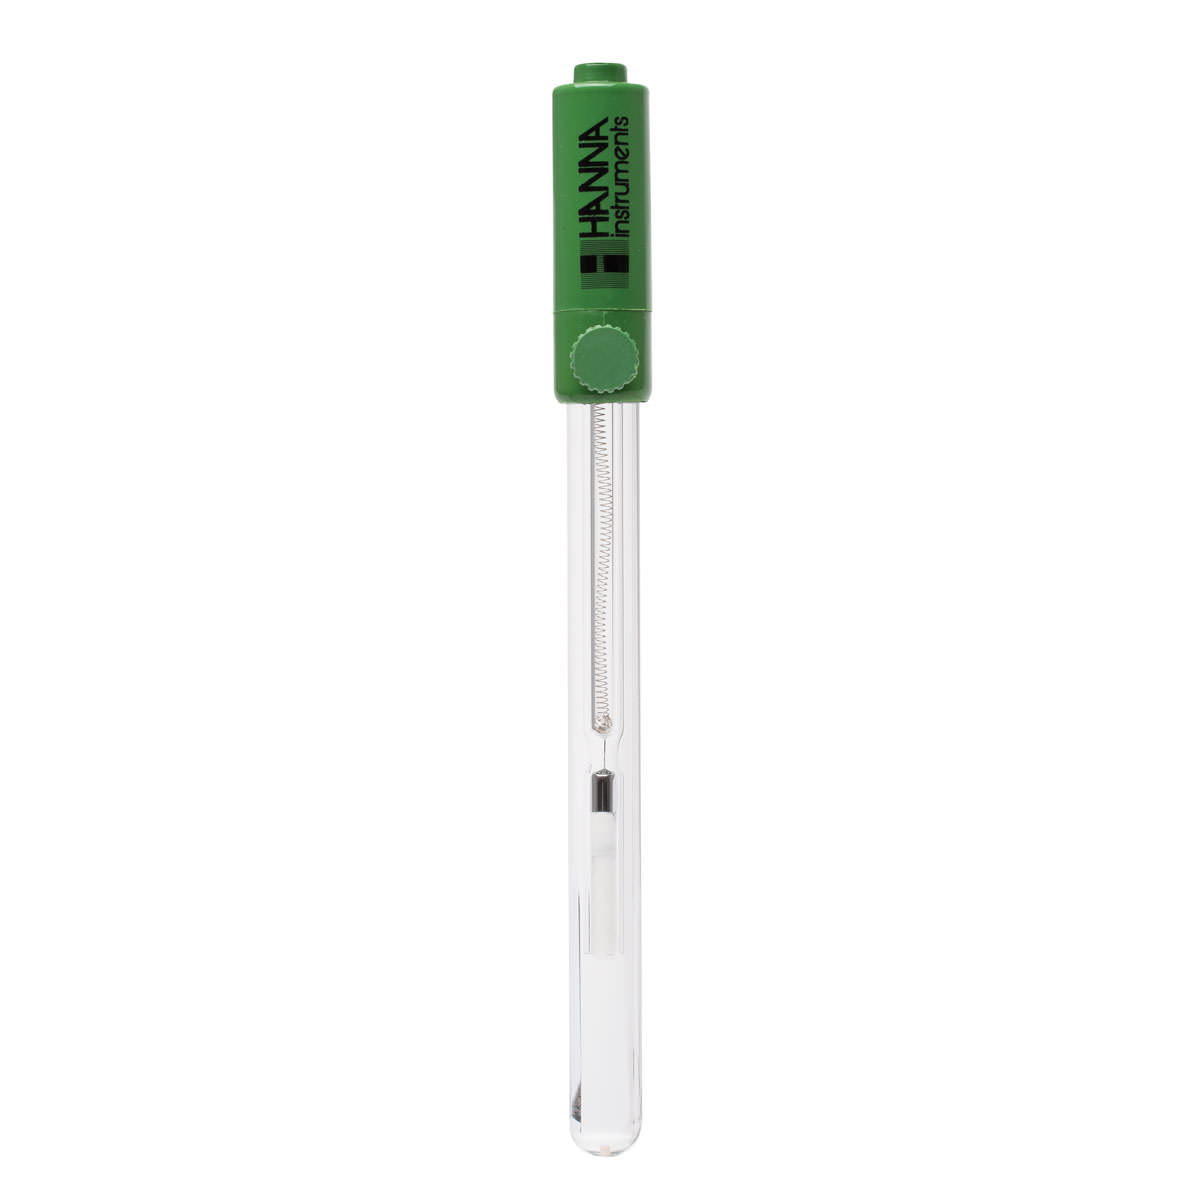 HI5412 Reference Electrode for General Purpose, ISE and Titrations 